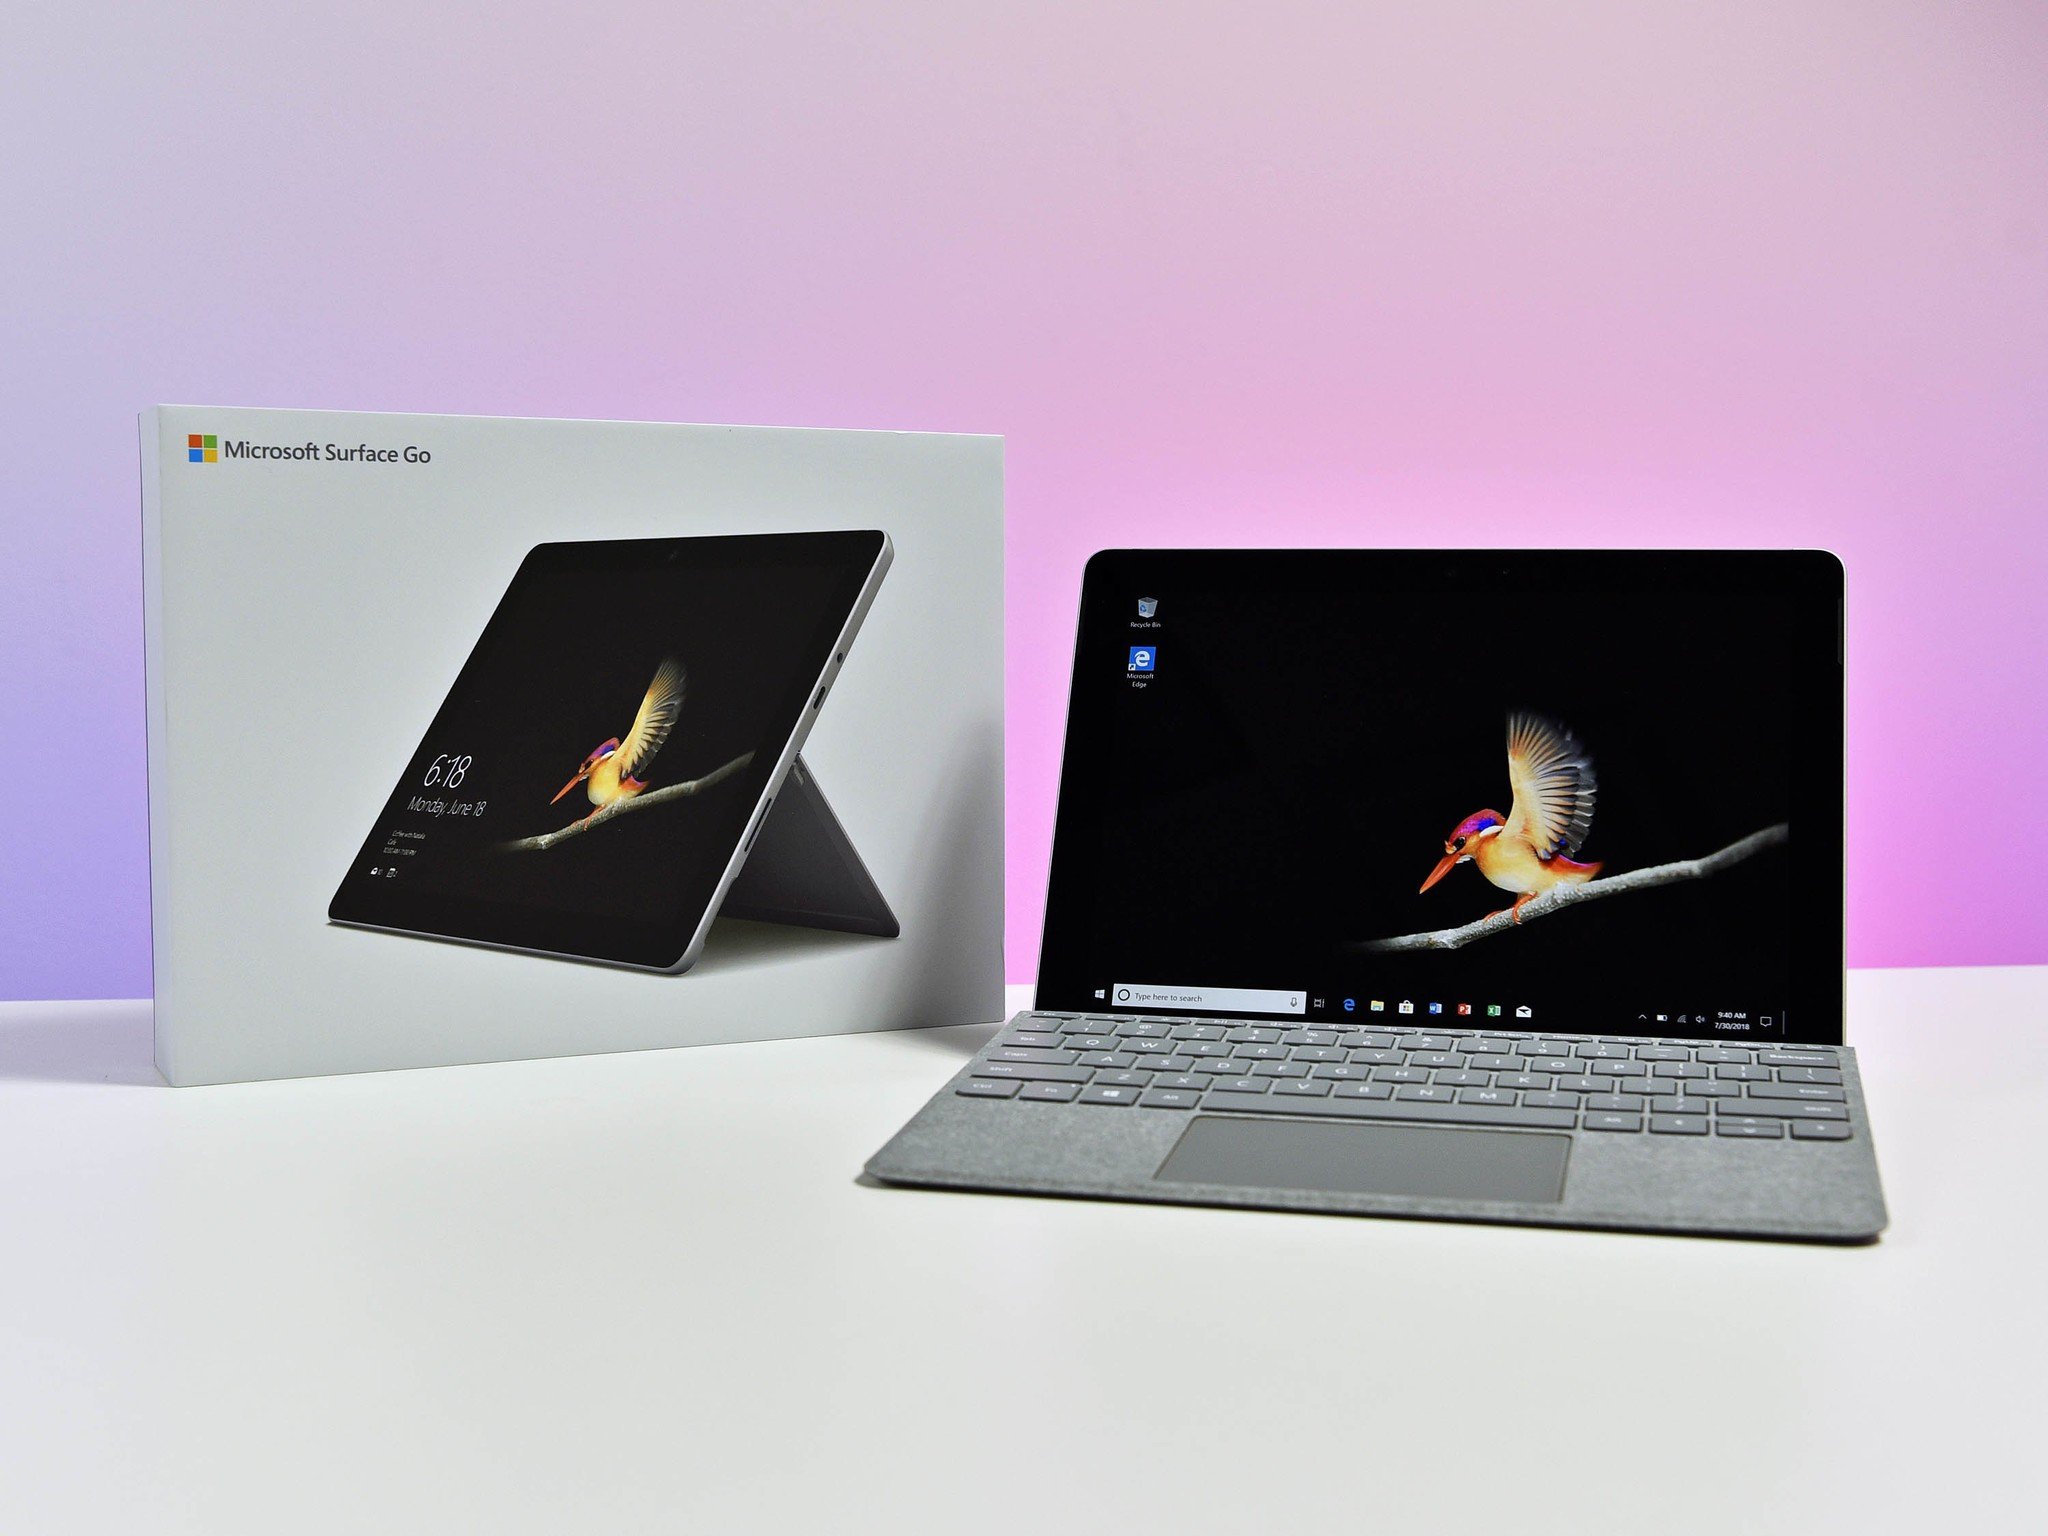 How to reinstall Windows 10 Home in S mode on your Surface Go 